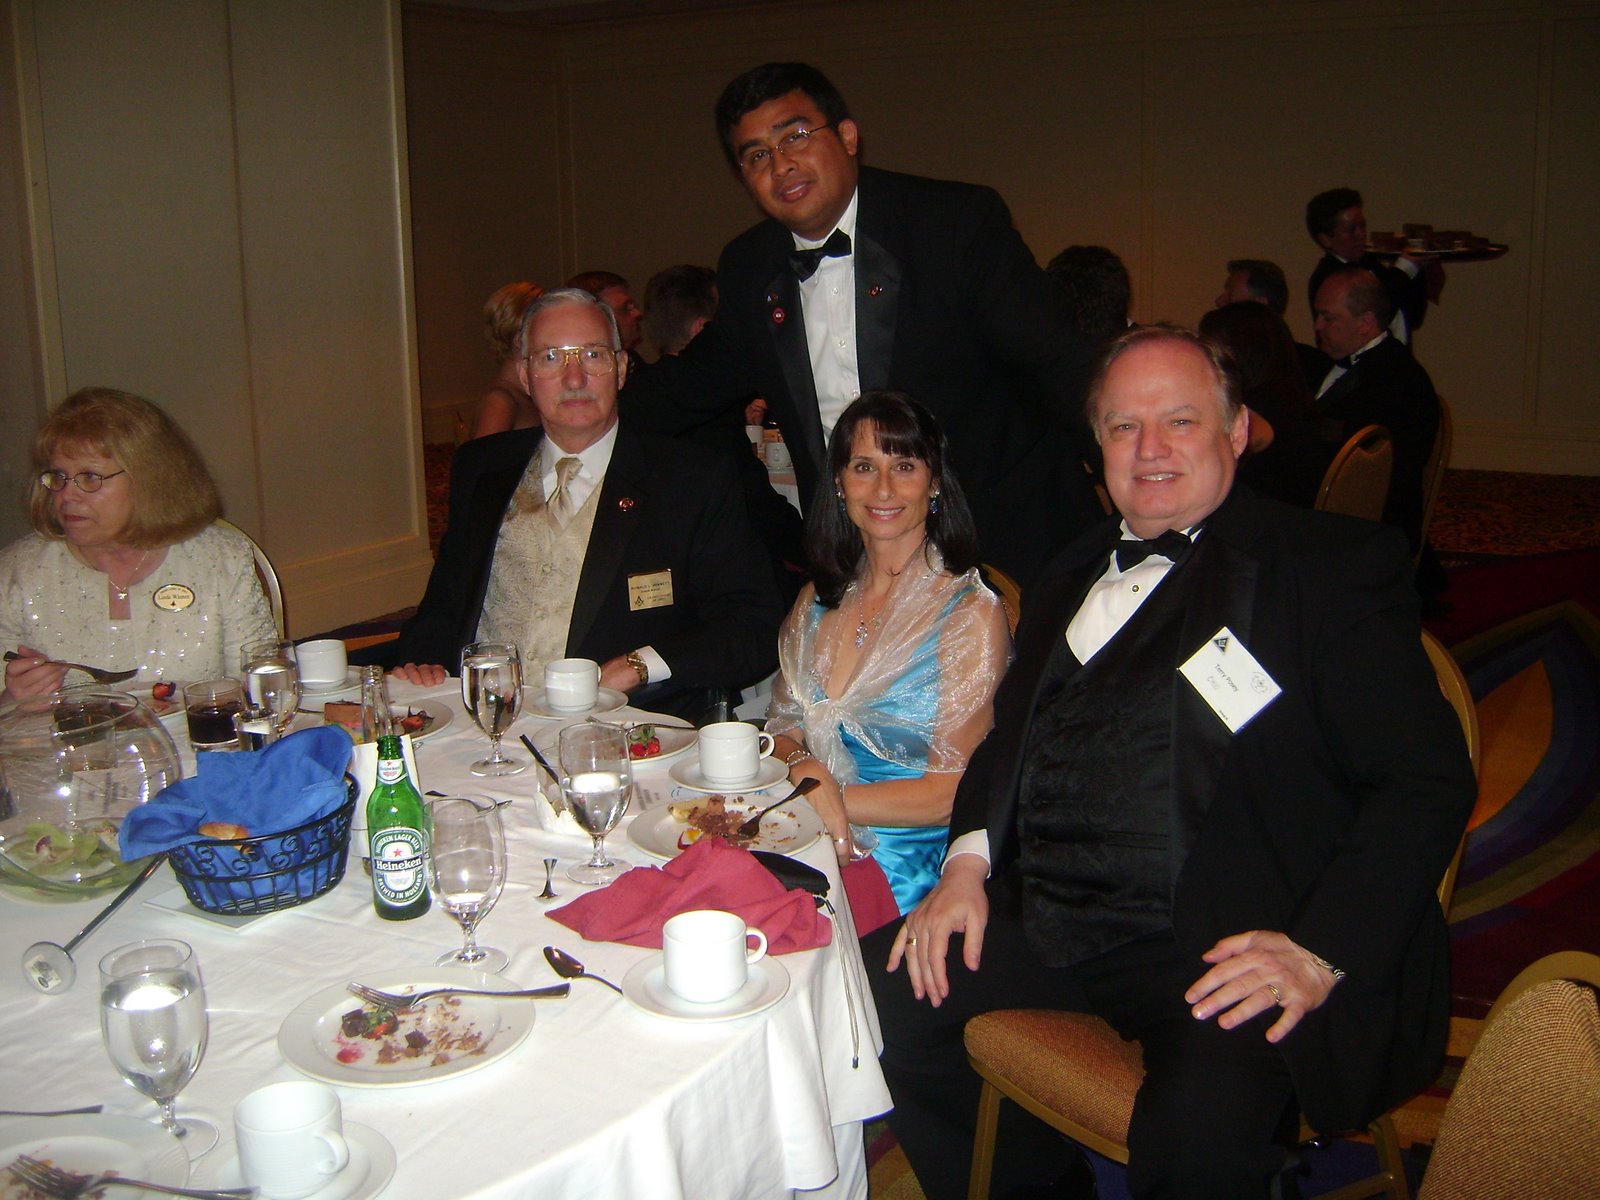 [WORLD+CONFERENCE+OF+MASONIC+GRAND+LODGES15.bmp]